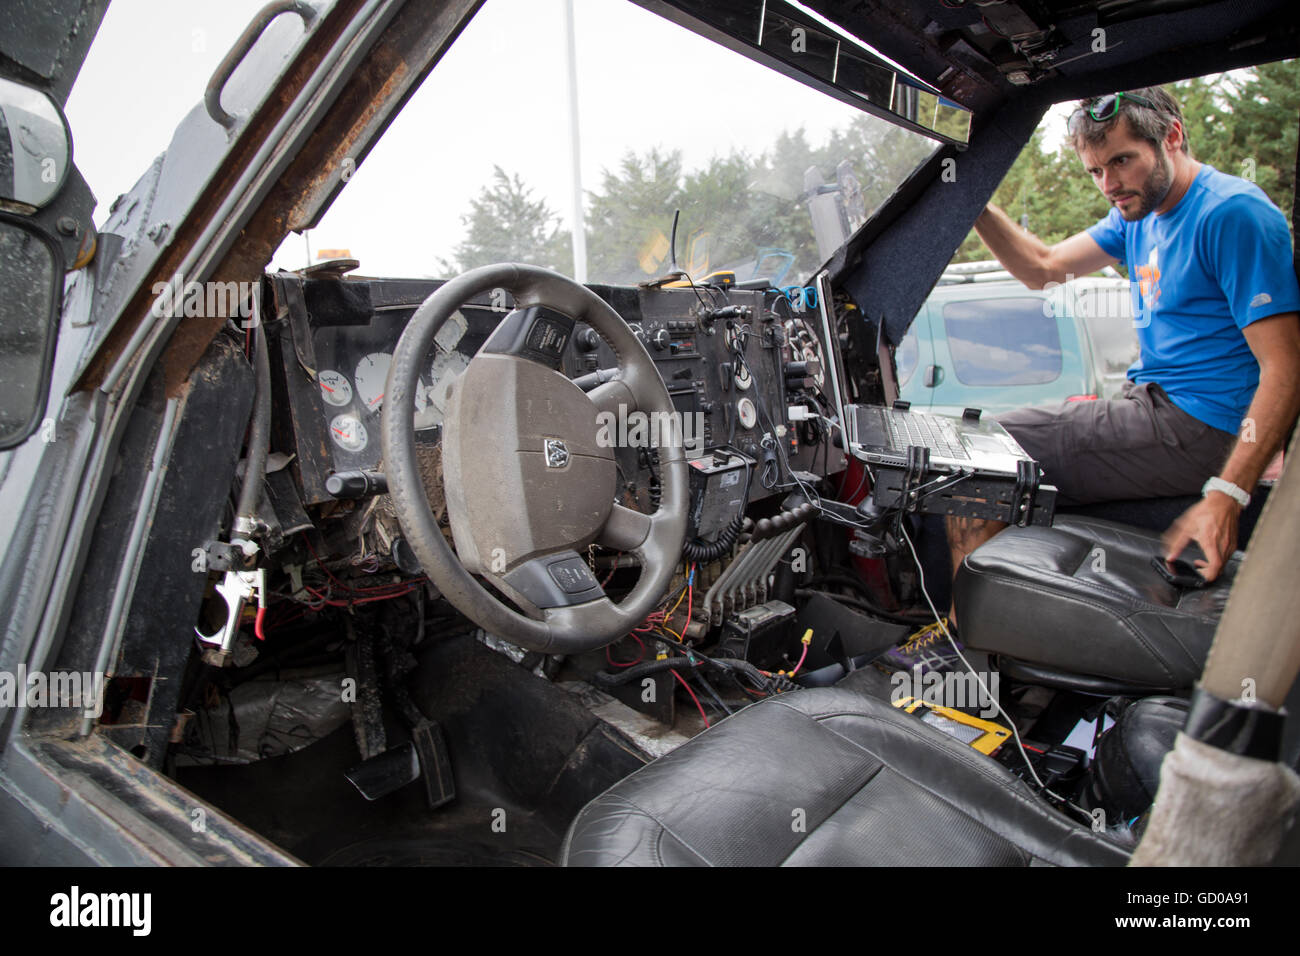 Interior cockpit of the TIV2 or 'Tornado Intercept Vehicle 2', a storm vehicle designed to penetrate the winds of a tornado. Stock Photo